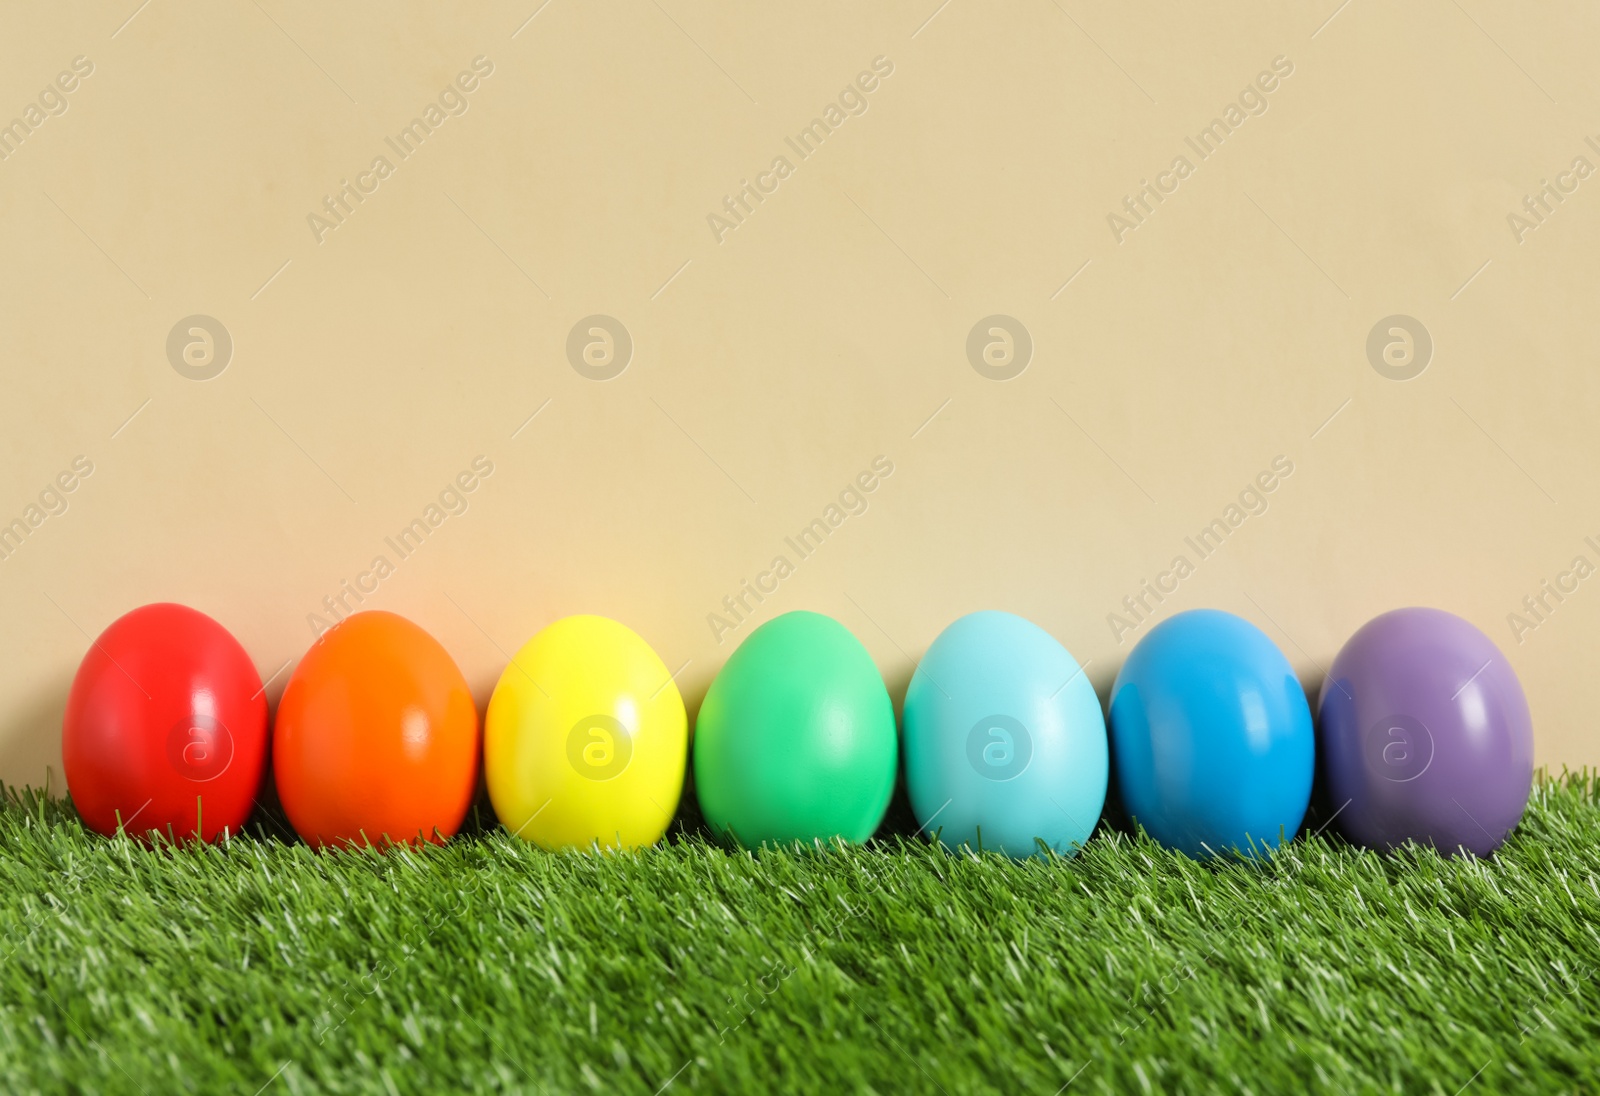 Photo of Bright Easter eggs on green grass against beige background